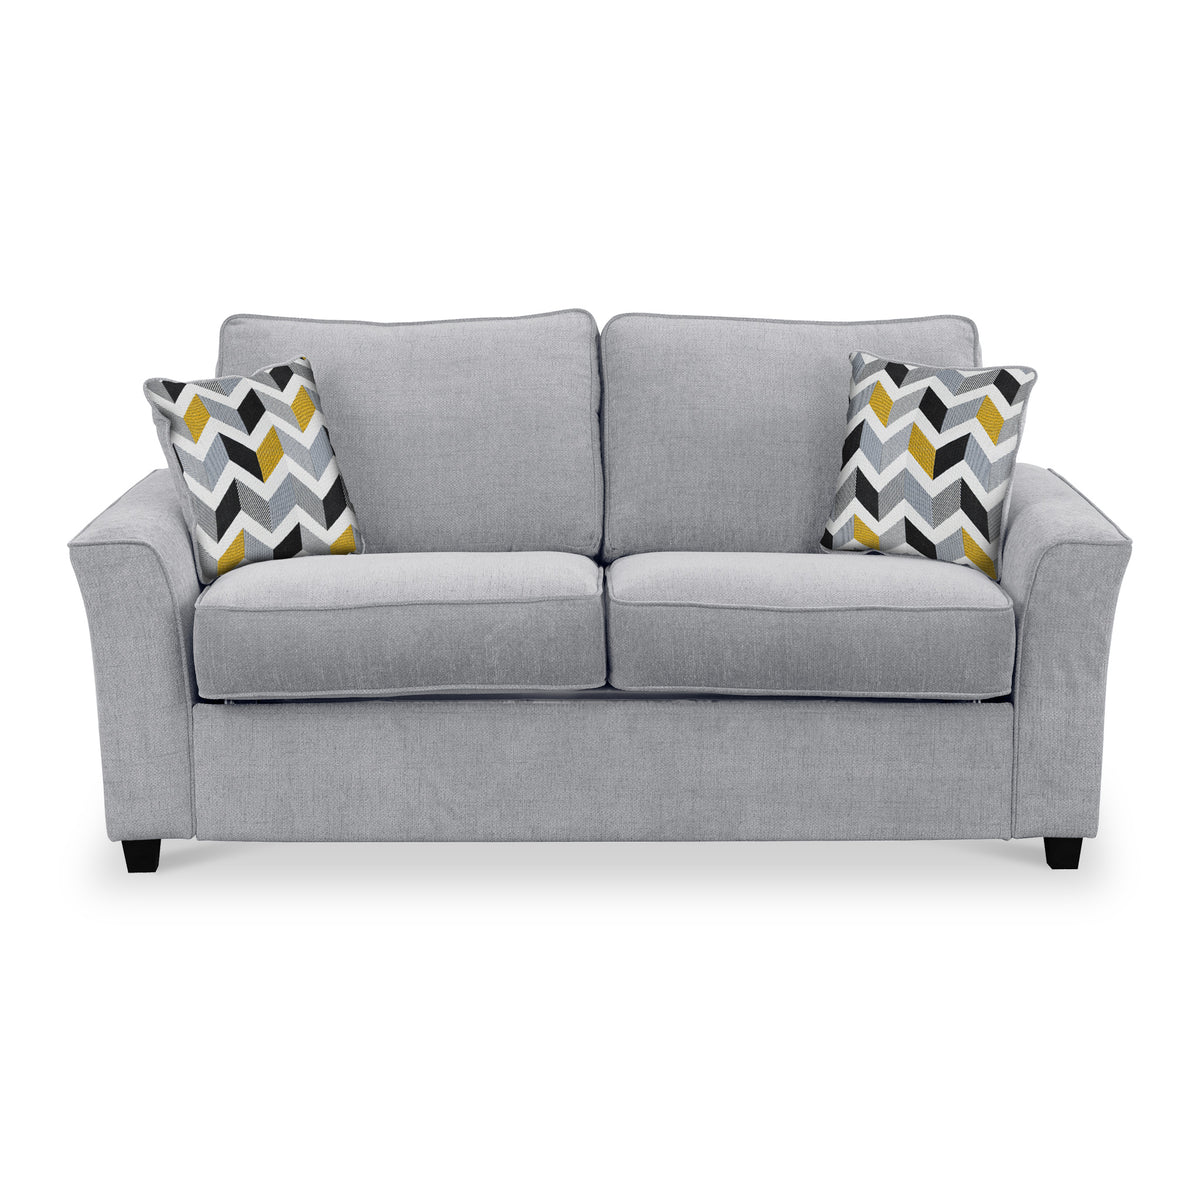 Abbott 2 Seater Sofabed in Silver with Morelisa Mustard Cushions by Roseland Furniture